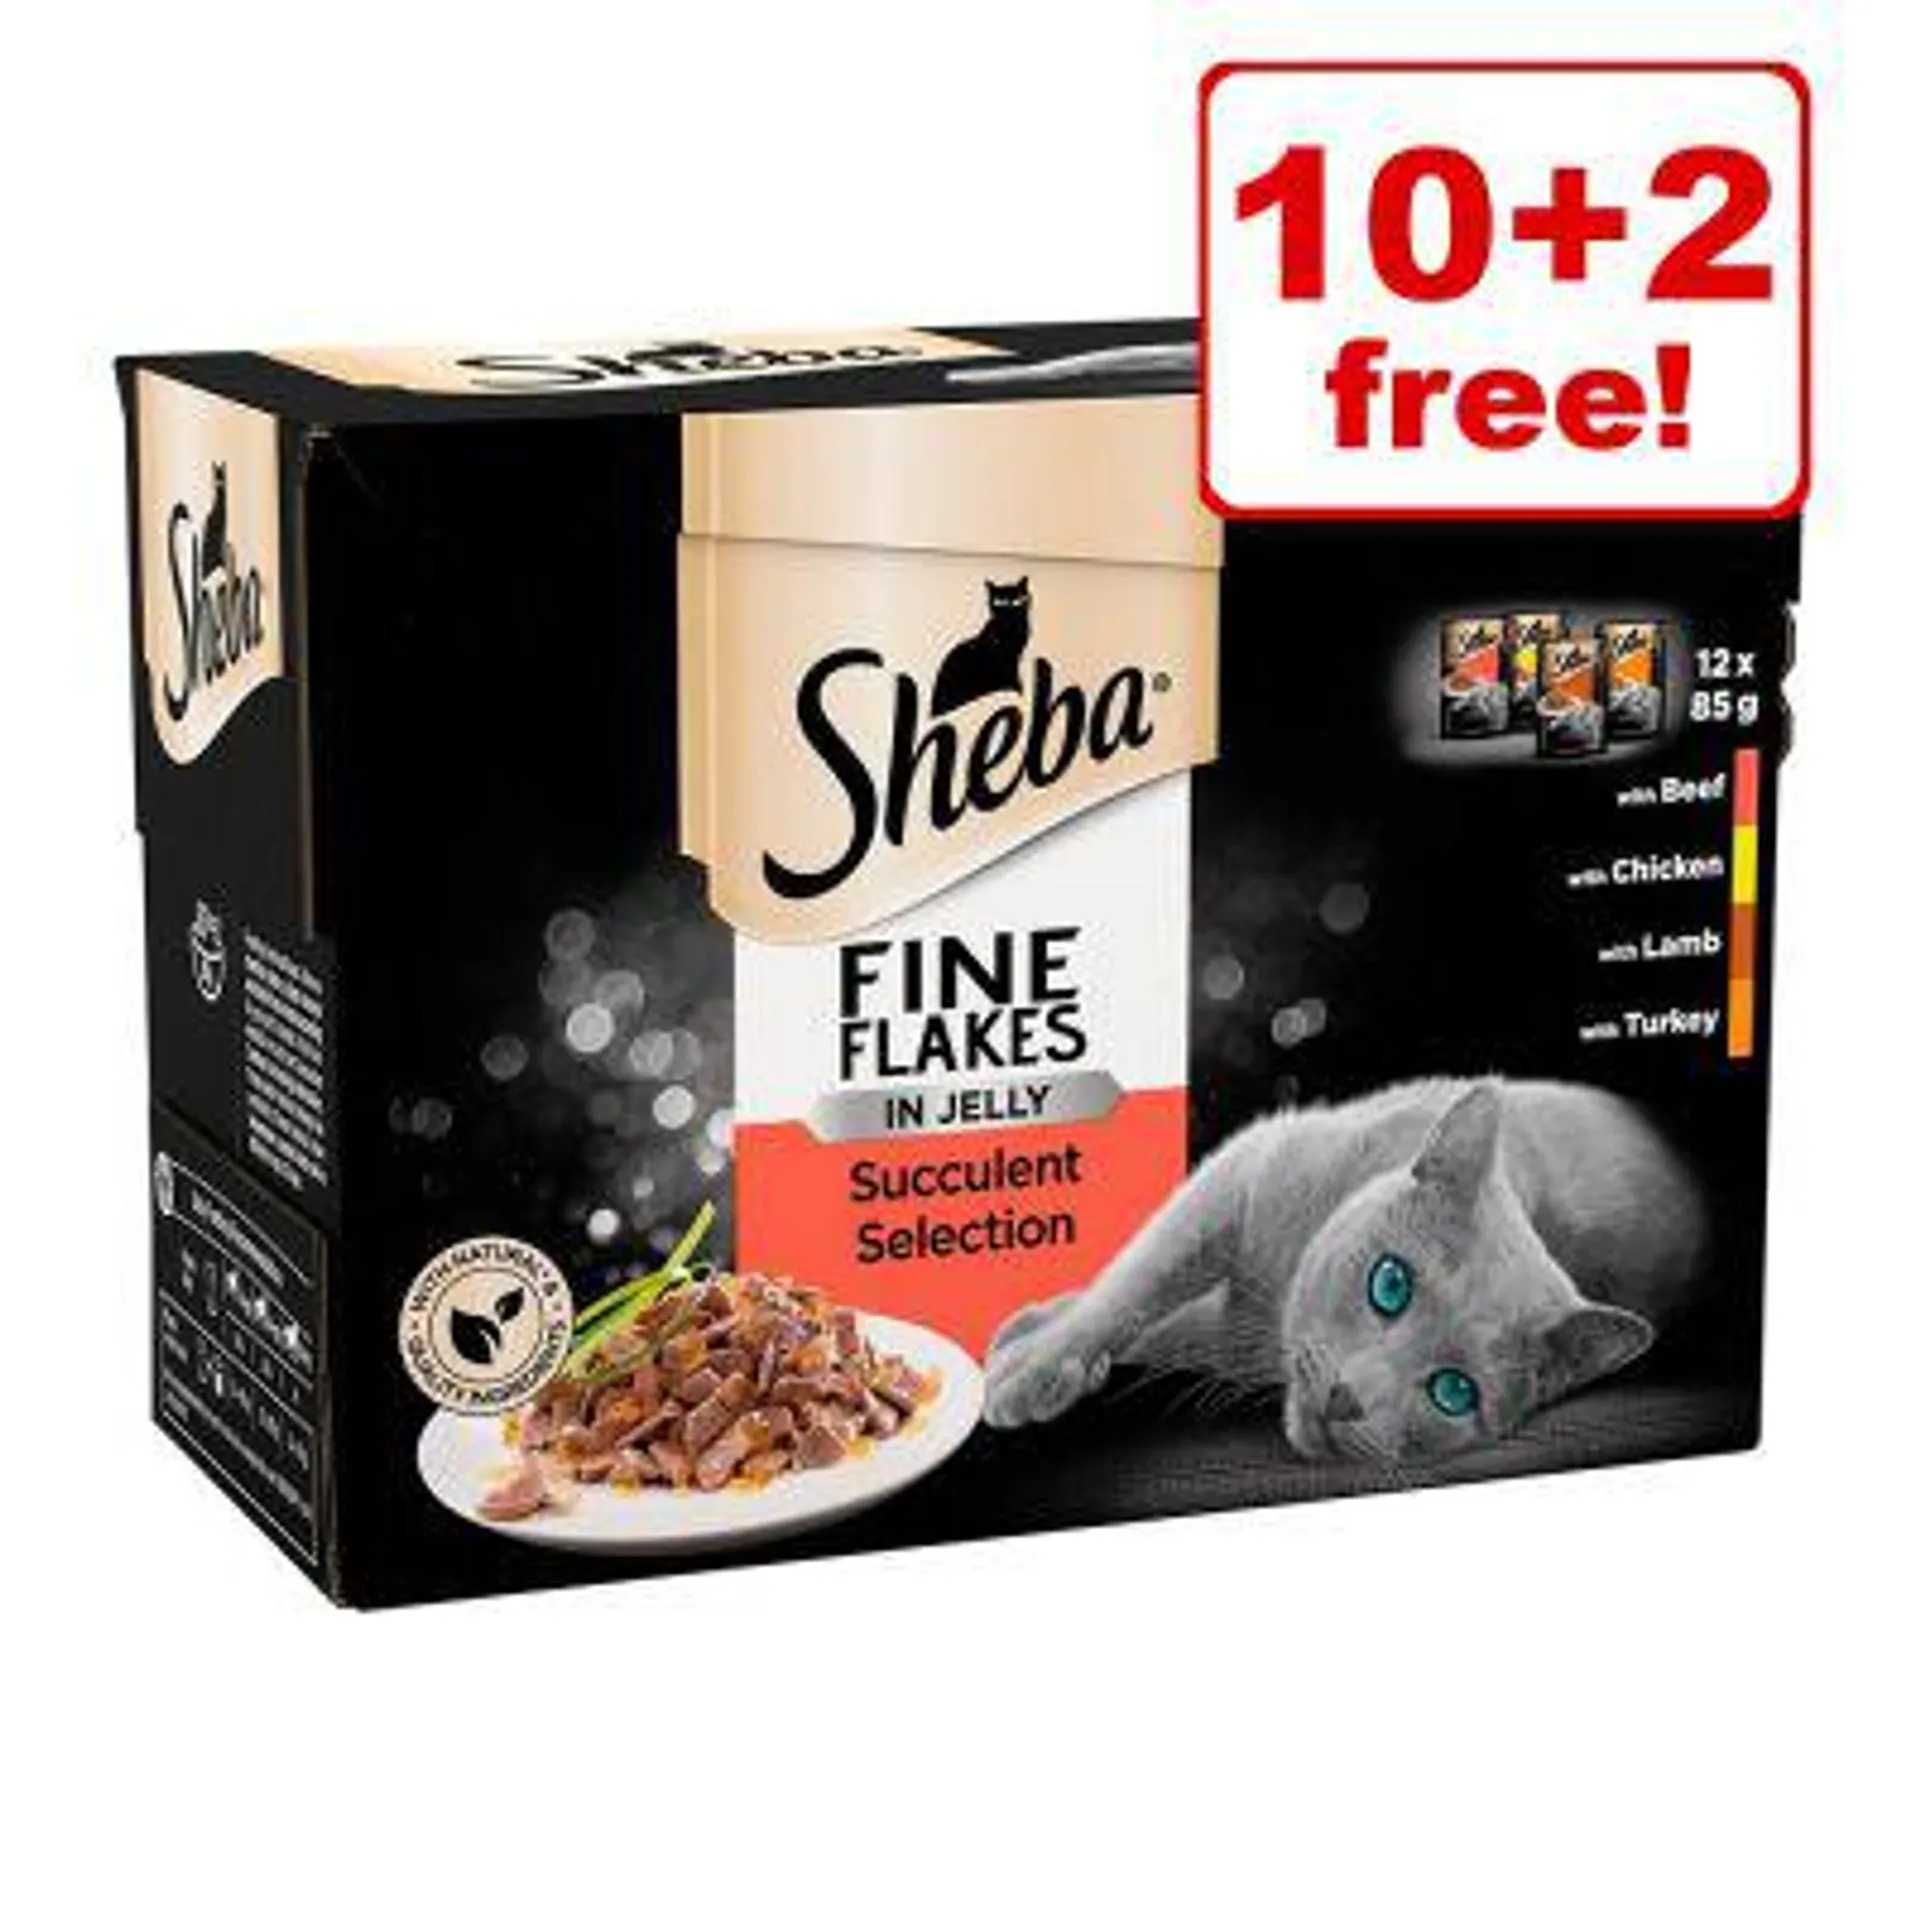 12 x 85g Sheba Pouches Wet Cat Food - 10 + 2 Free!*